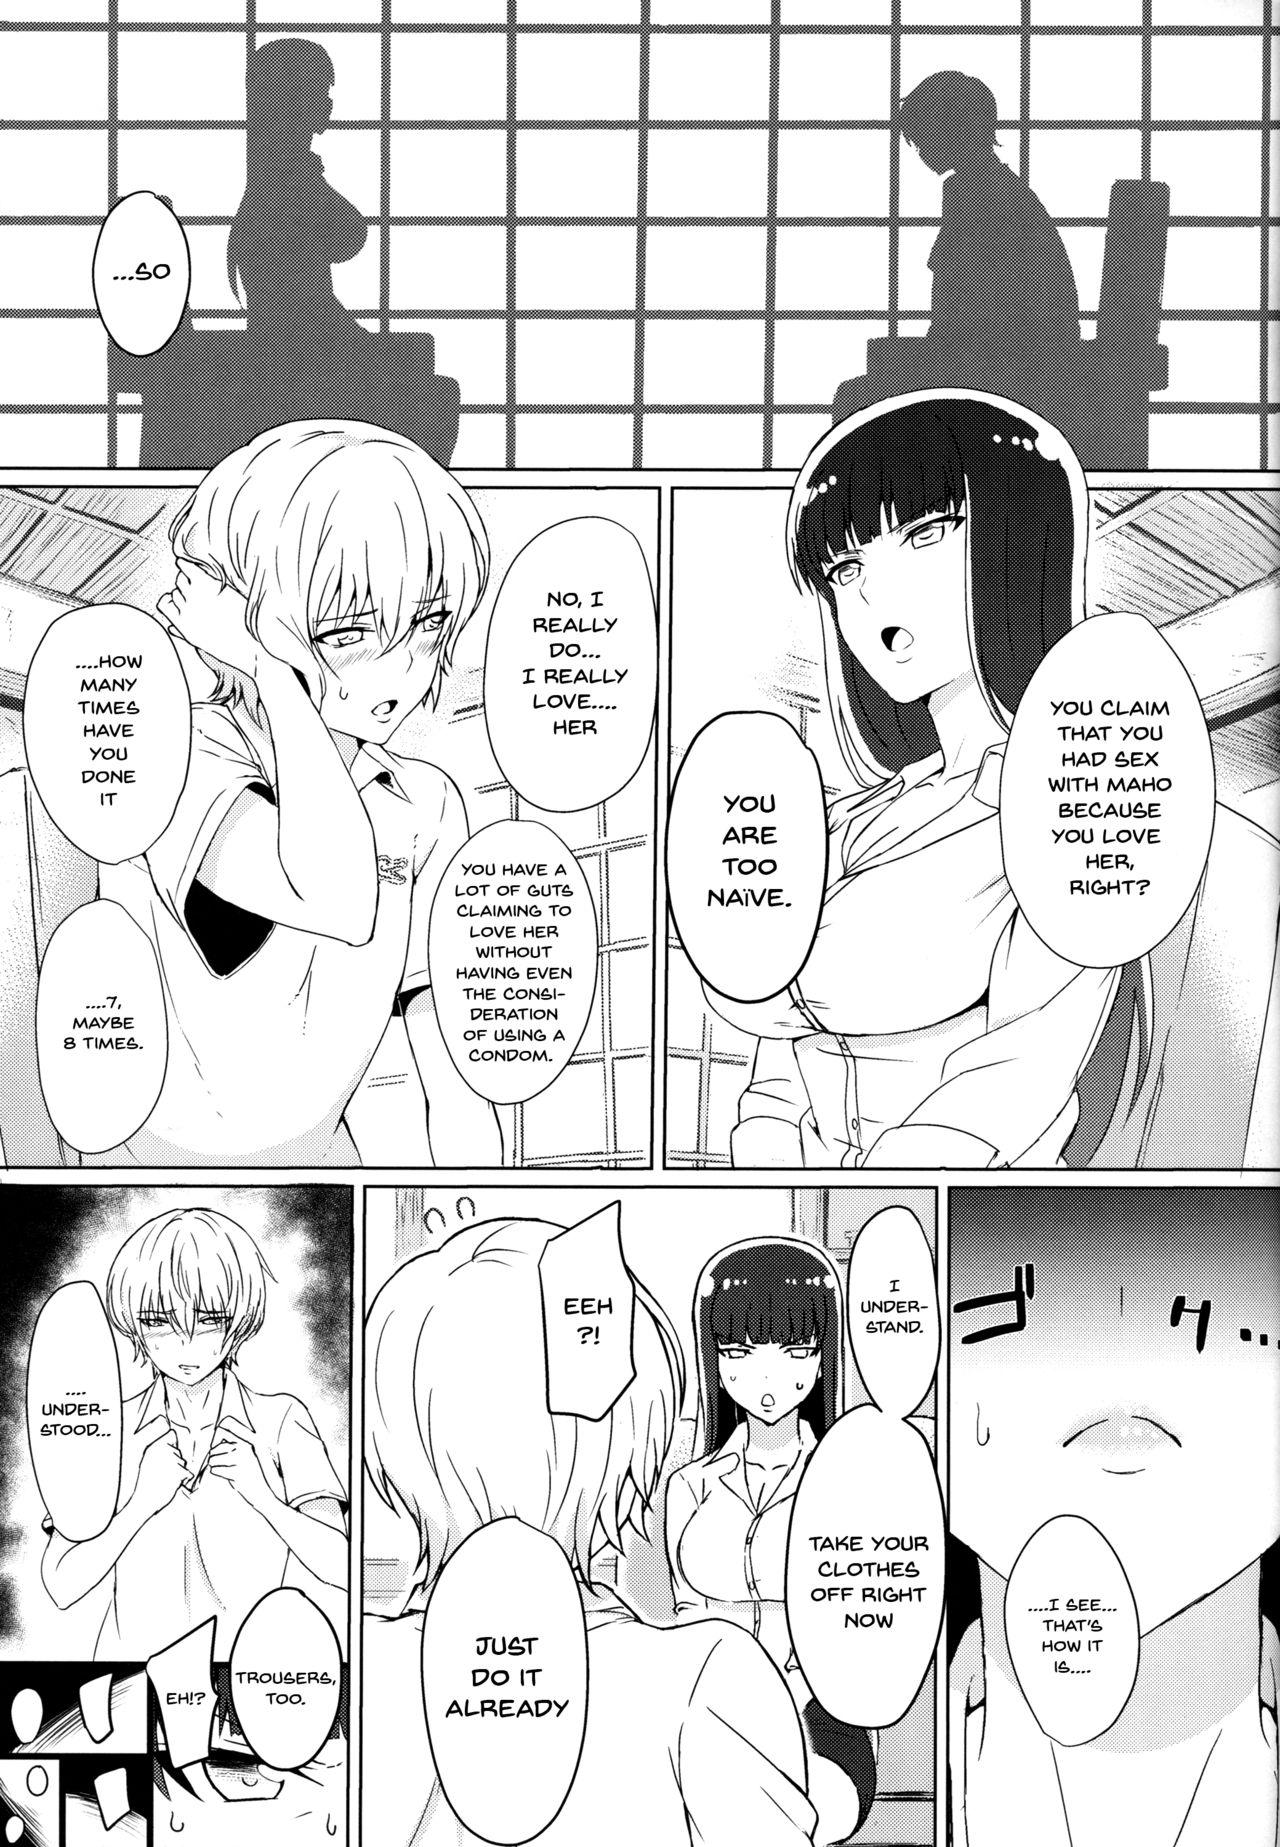 Wife Wakai Otoko to Shihox | Doing It With a Younger Guy - Girls und panzer Rough Sex - Page 4